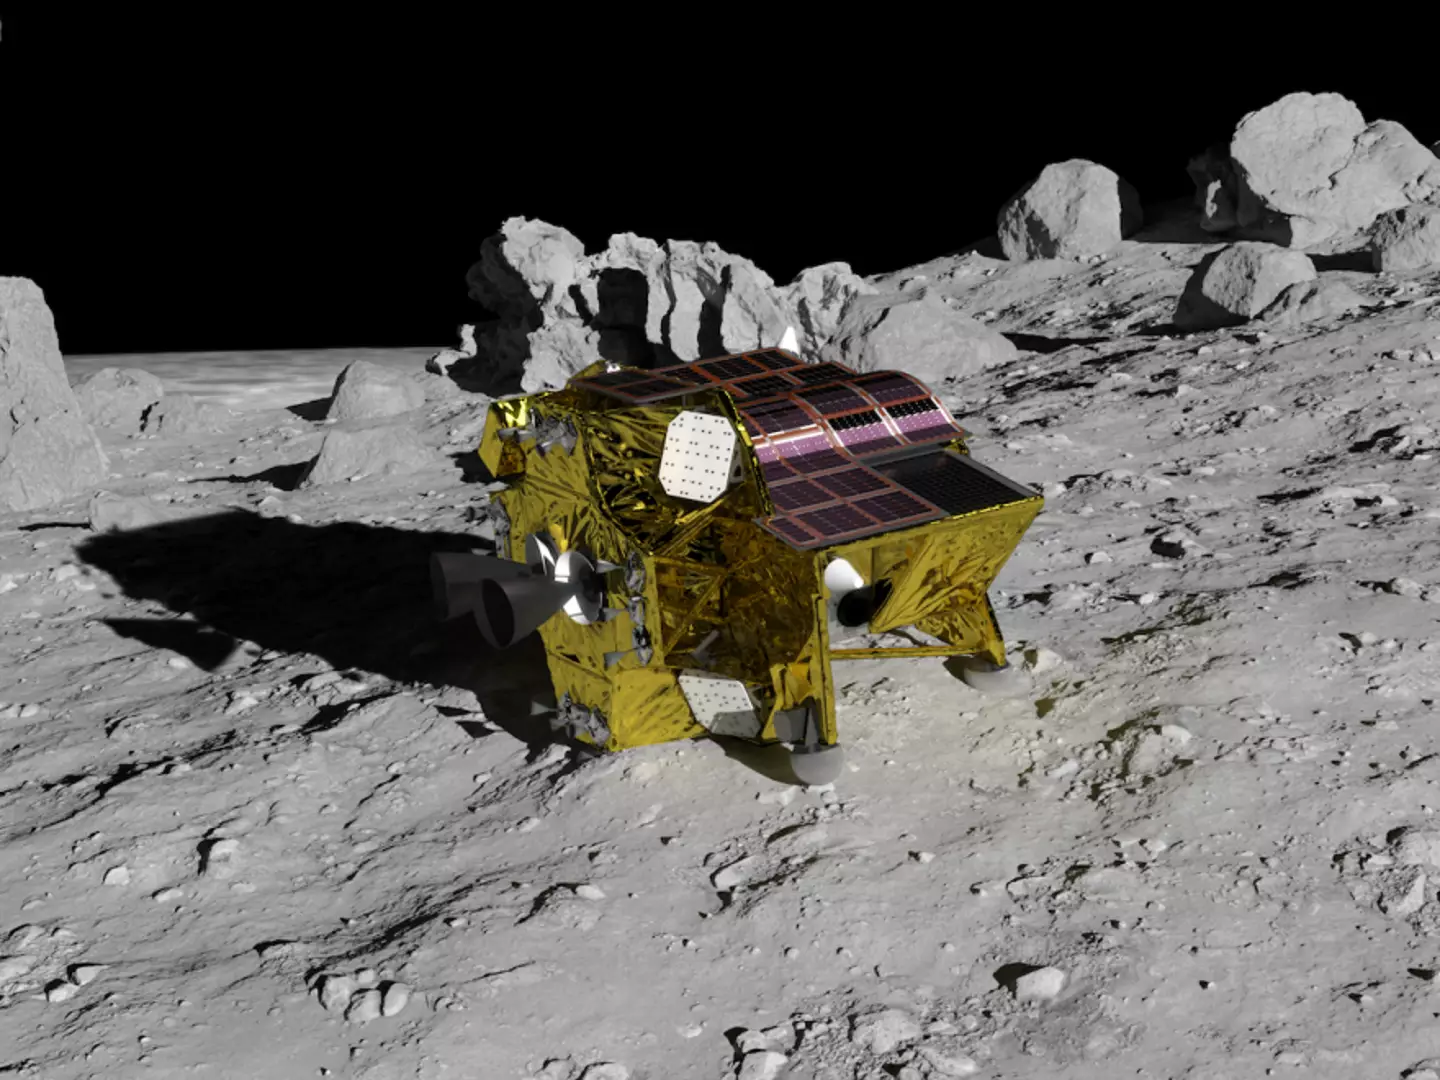 The spacecraft is set to land on the Moon next month.